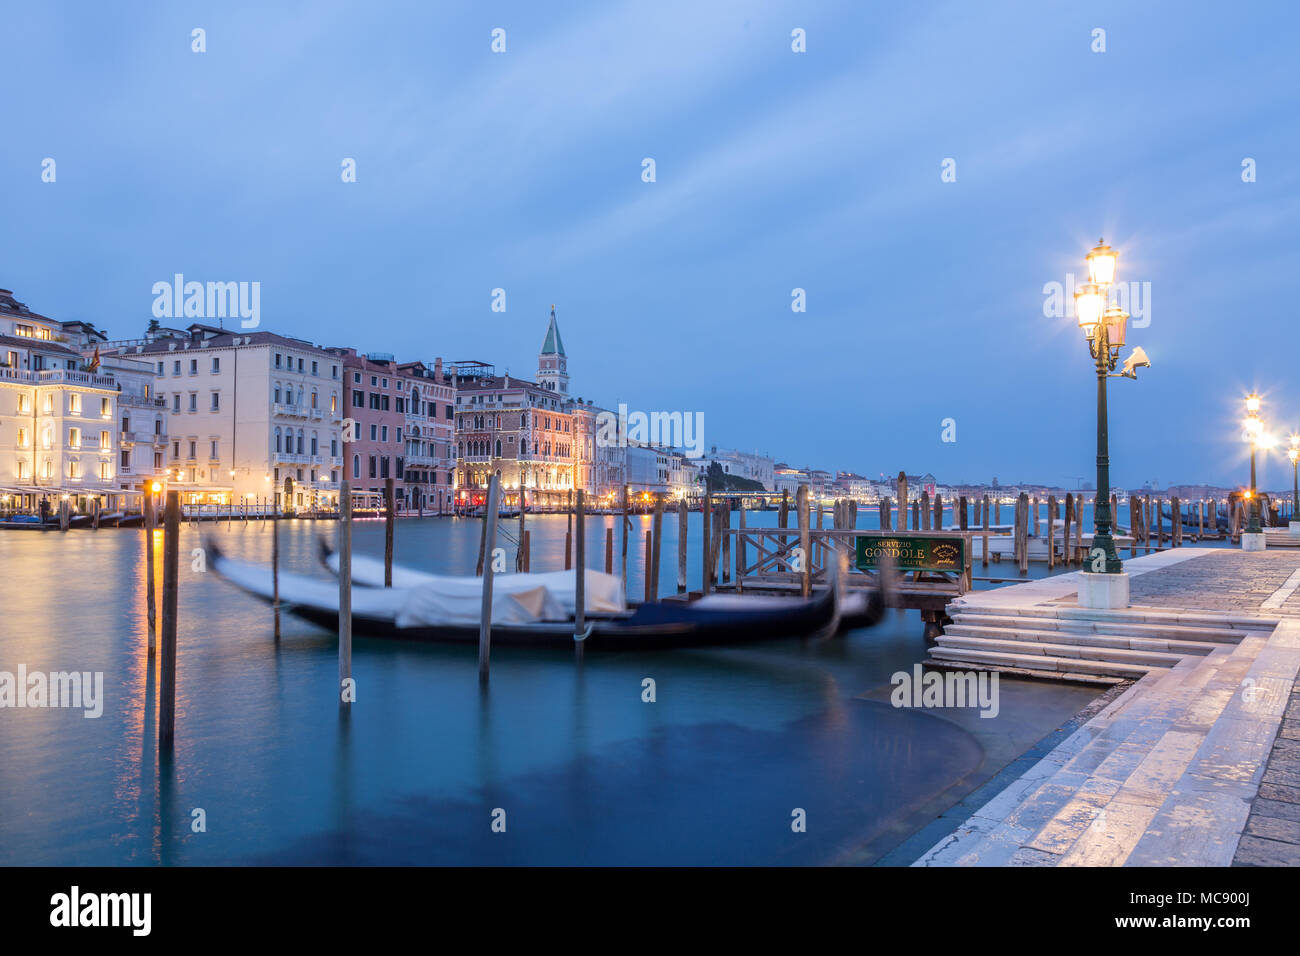 The Grand Canal at dusk, seen from Fondamenta Salute Stock Photo